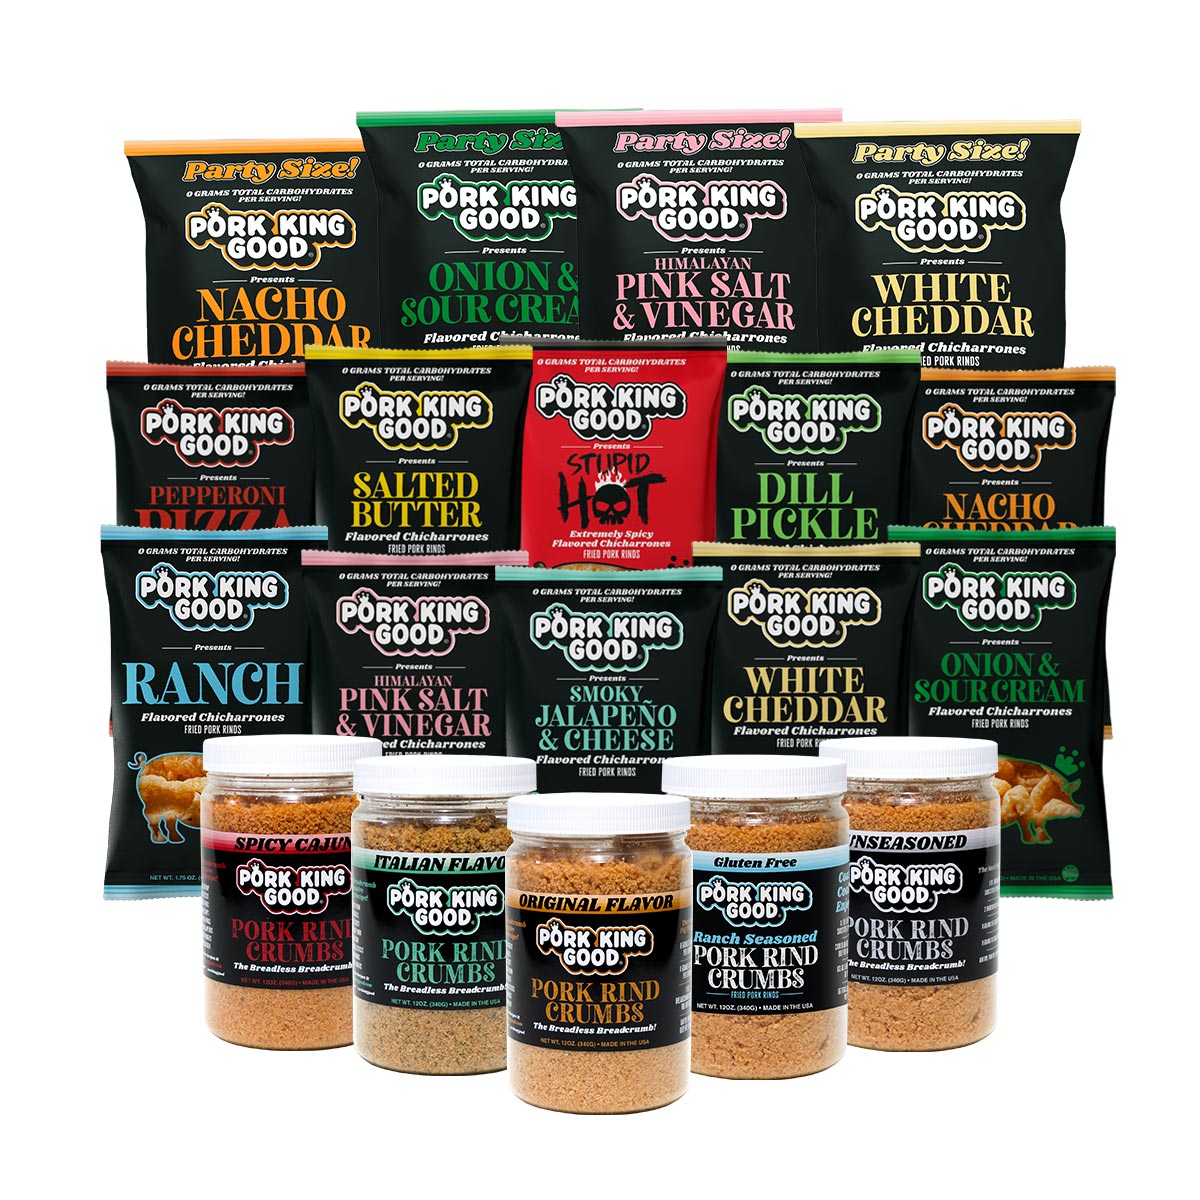 Pork King Good Products Are Keto Pantry Must Haves